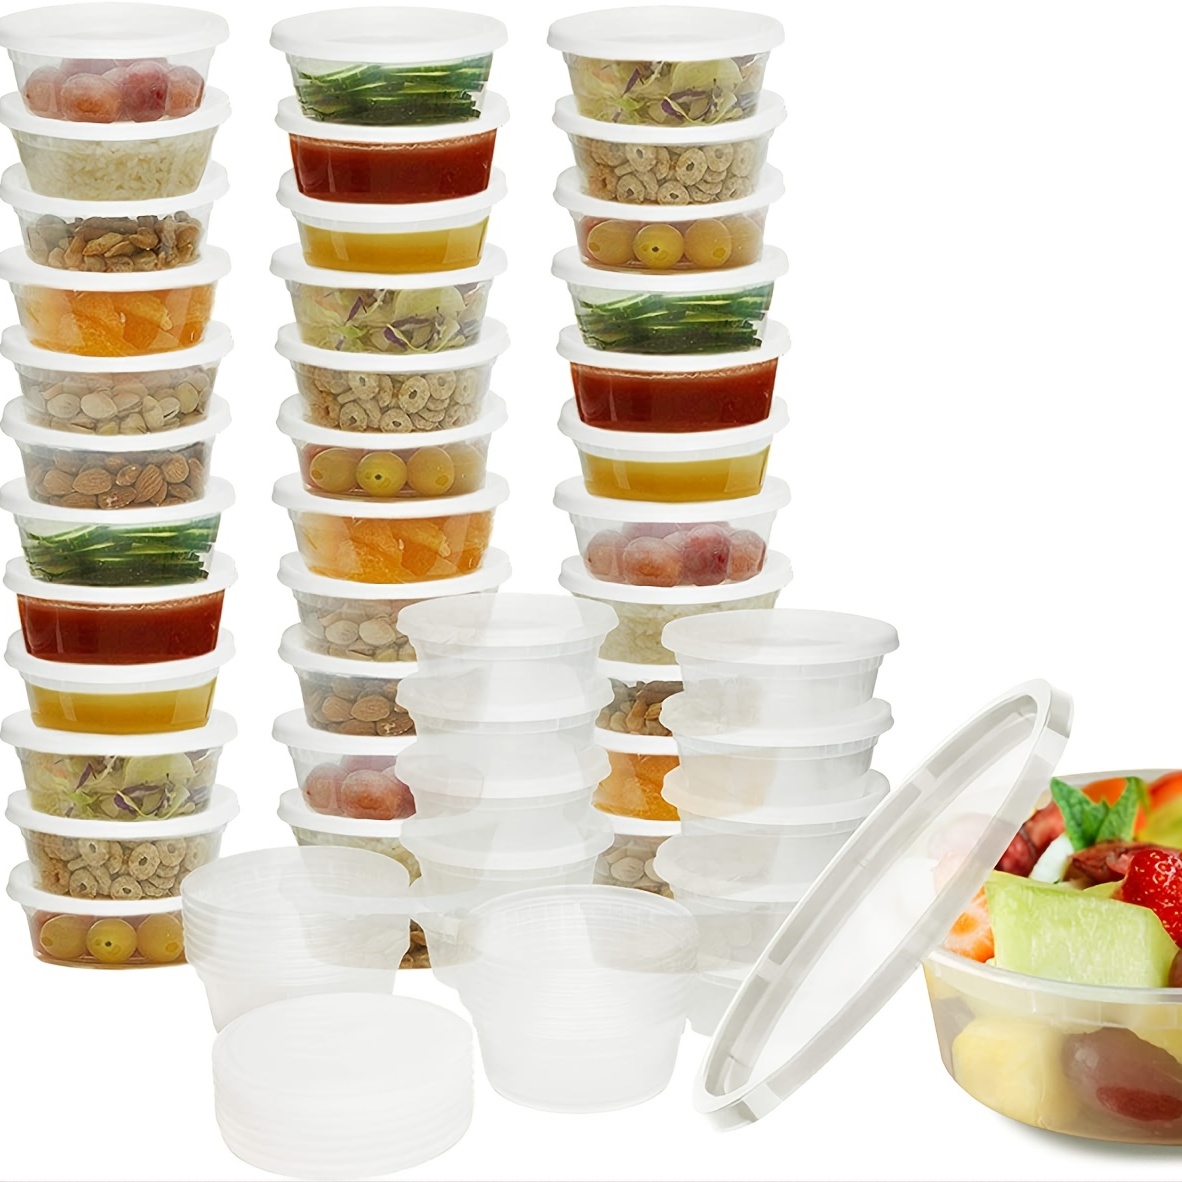 30pcs 8oz Plastic Deli Containers With Lids | Eco Friendly | BPA Free | Meal Prep | Microwave & Dishwasher Safe